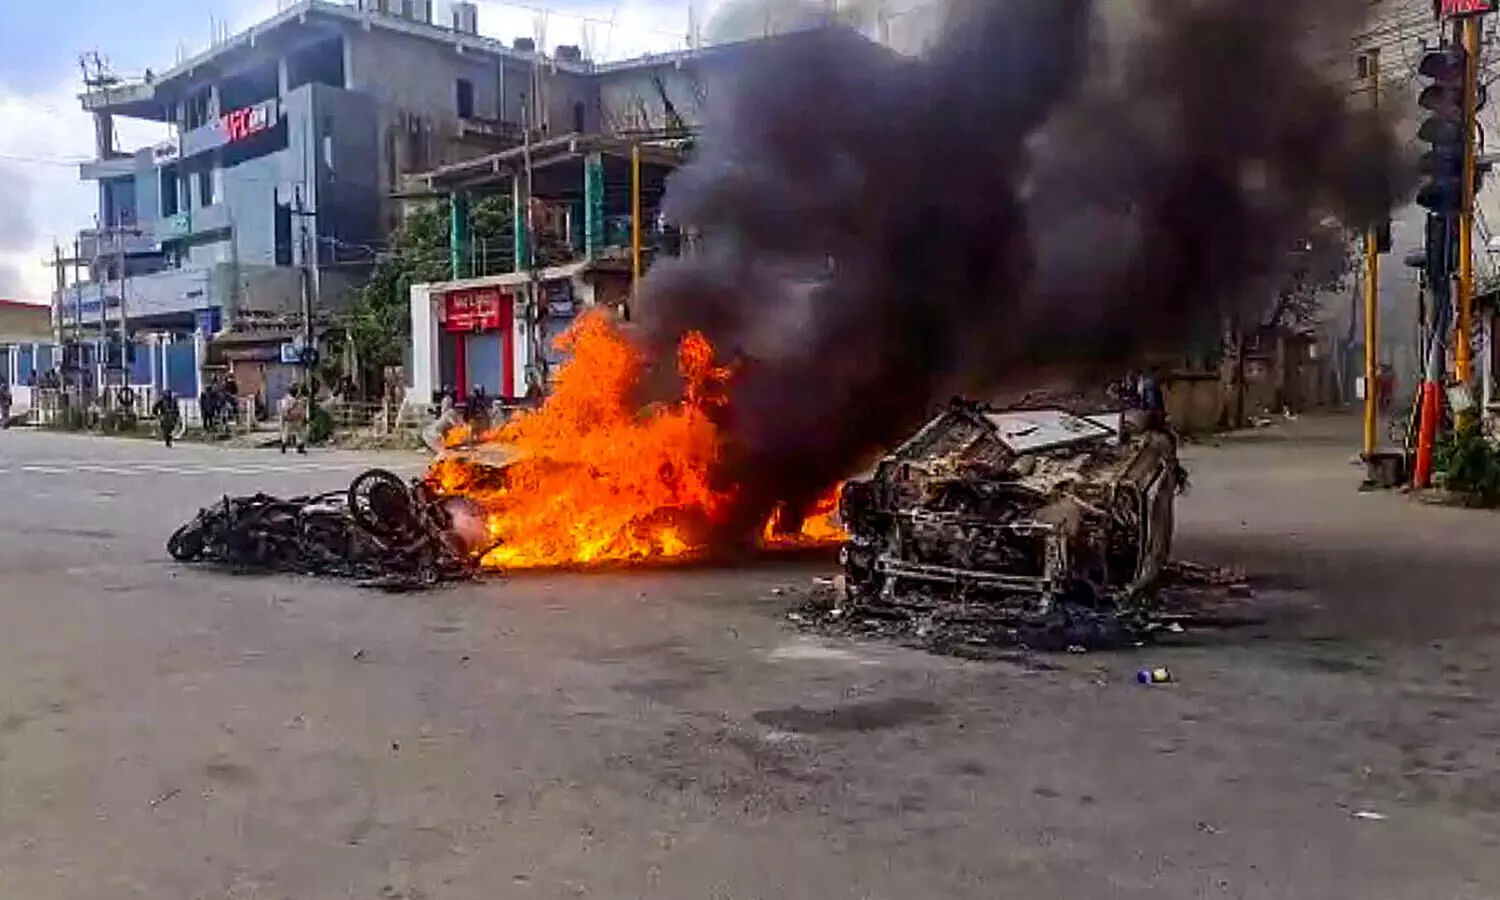 Manipur violence: Congress slams PM Modi govt over situation in state